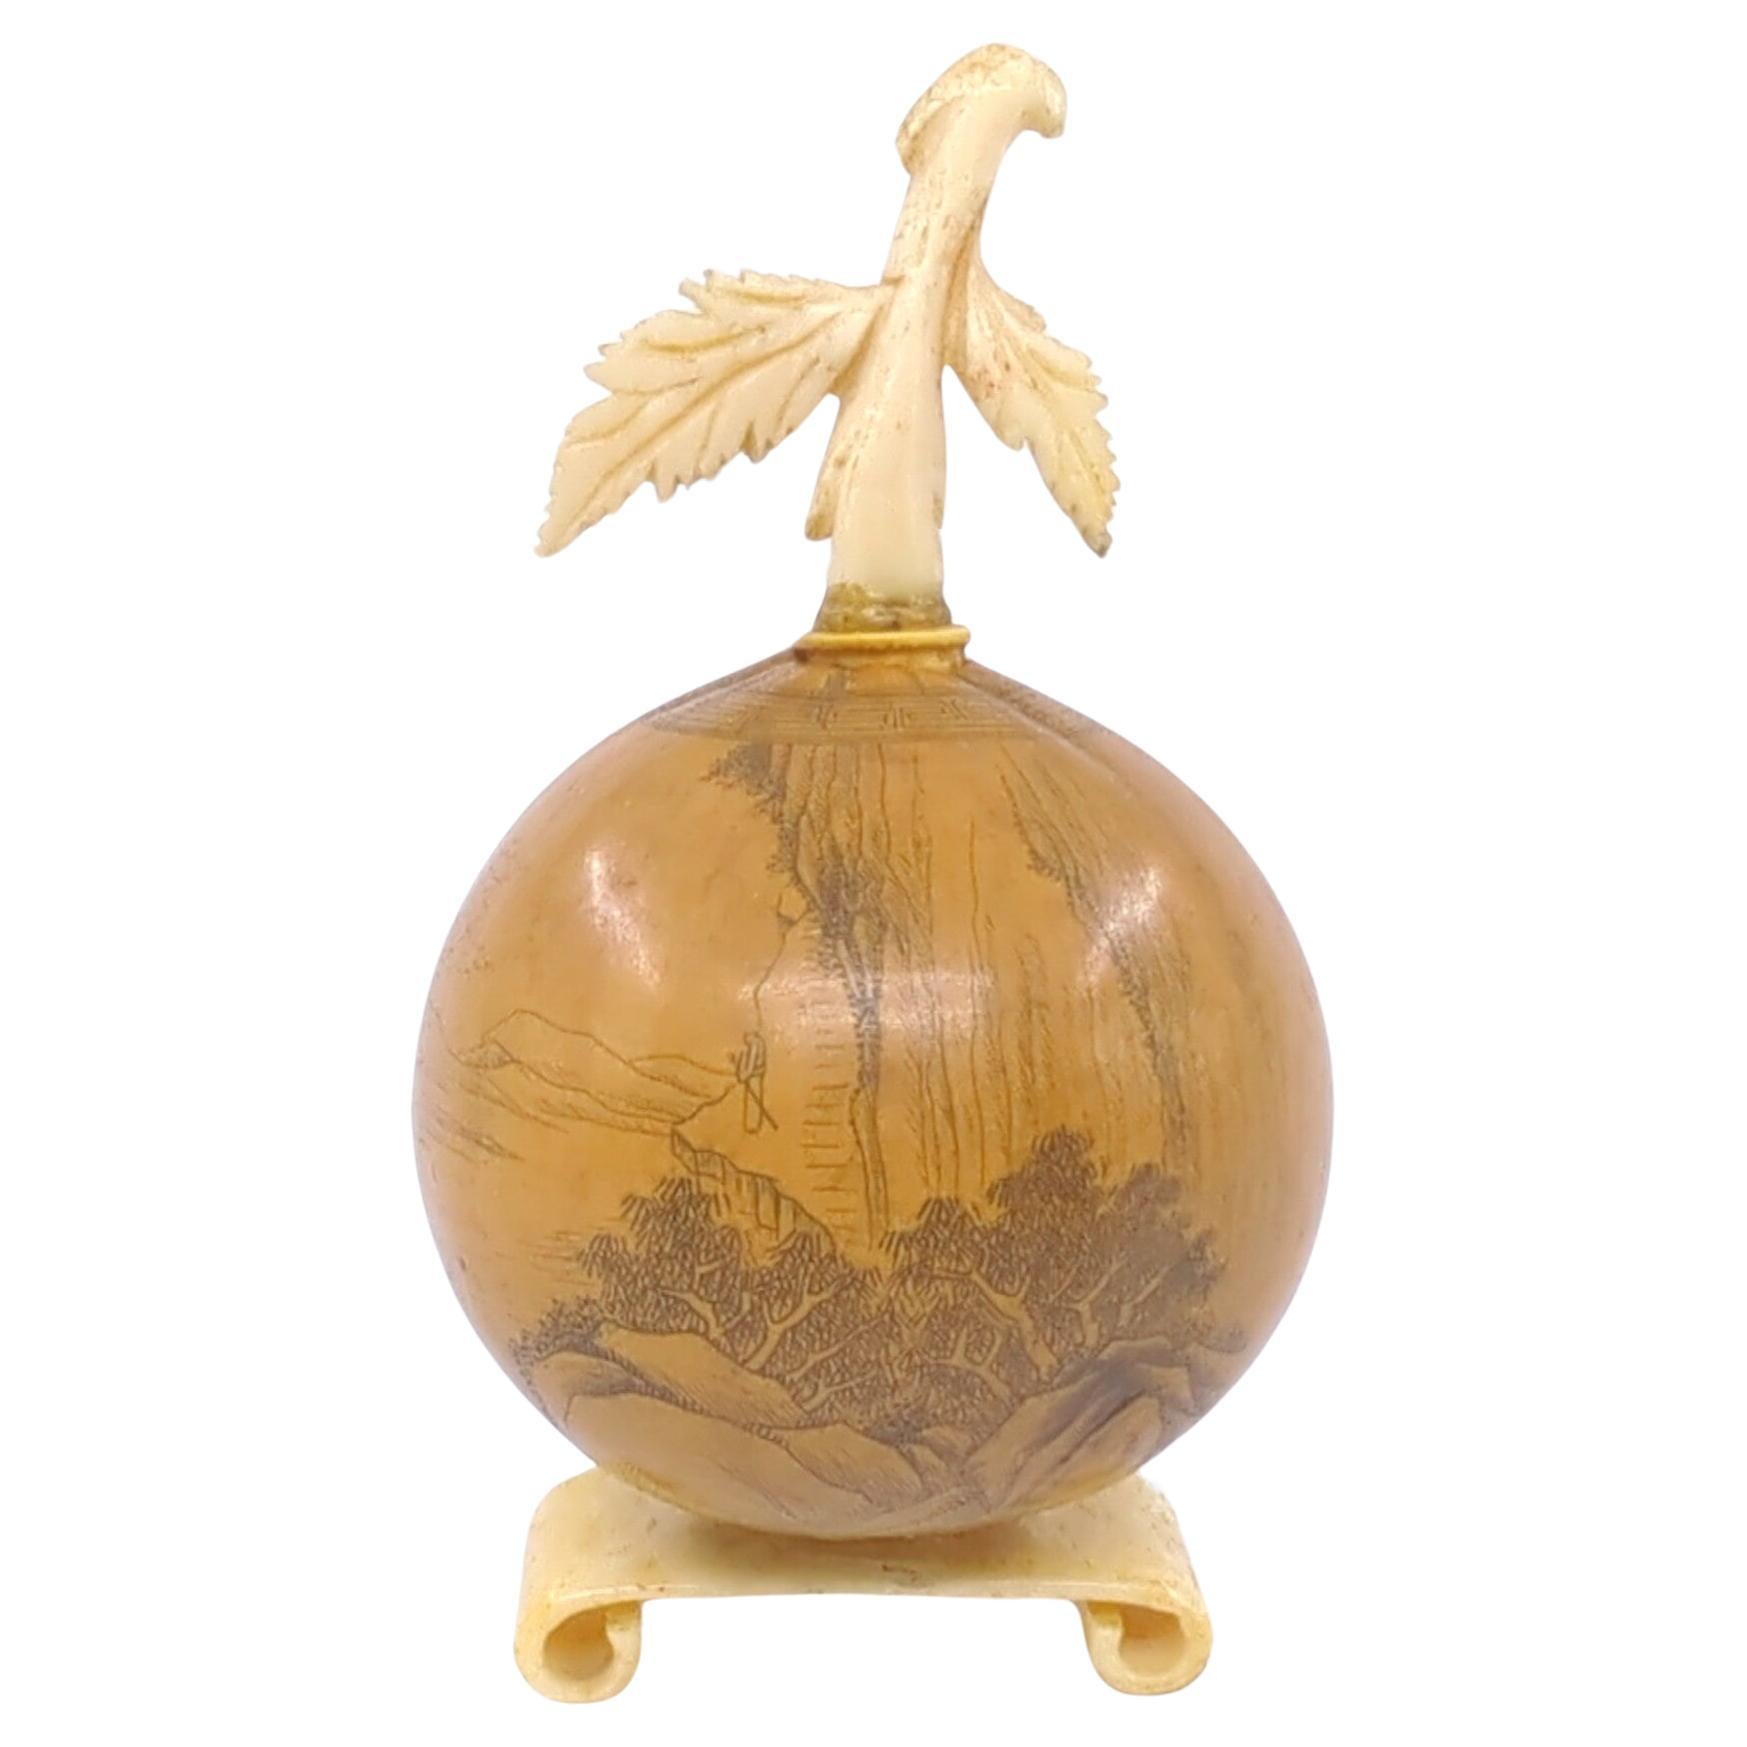 A masterfully carved hulu gourd snuff bottle by the esteemed artist Ruan Guang Yu (阮光宇, 1903-1960), a seminal figure in the realm of gourd carving. Originating as a folk painter from Hebei Province, Ruan moved to Lanzhou in 1938, where he began to